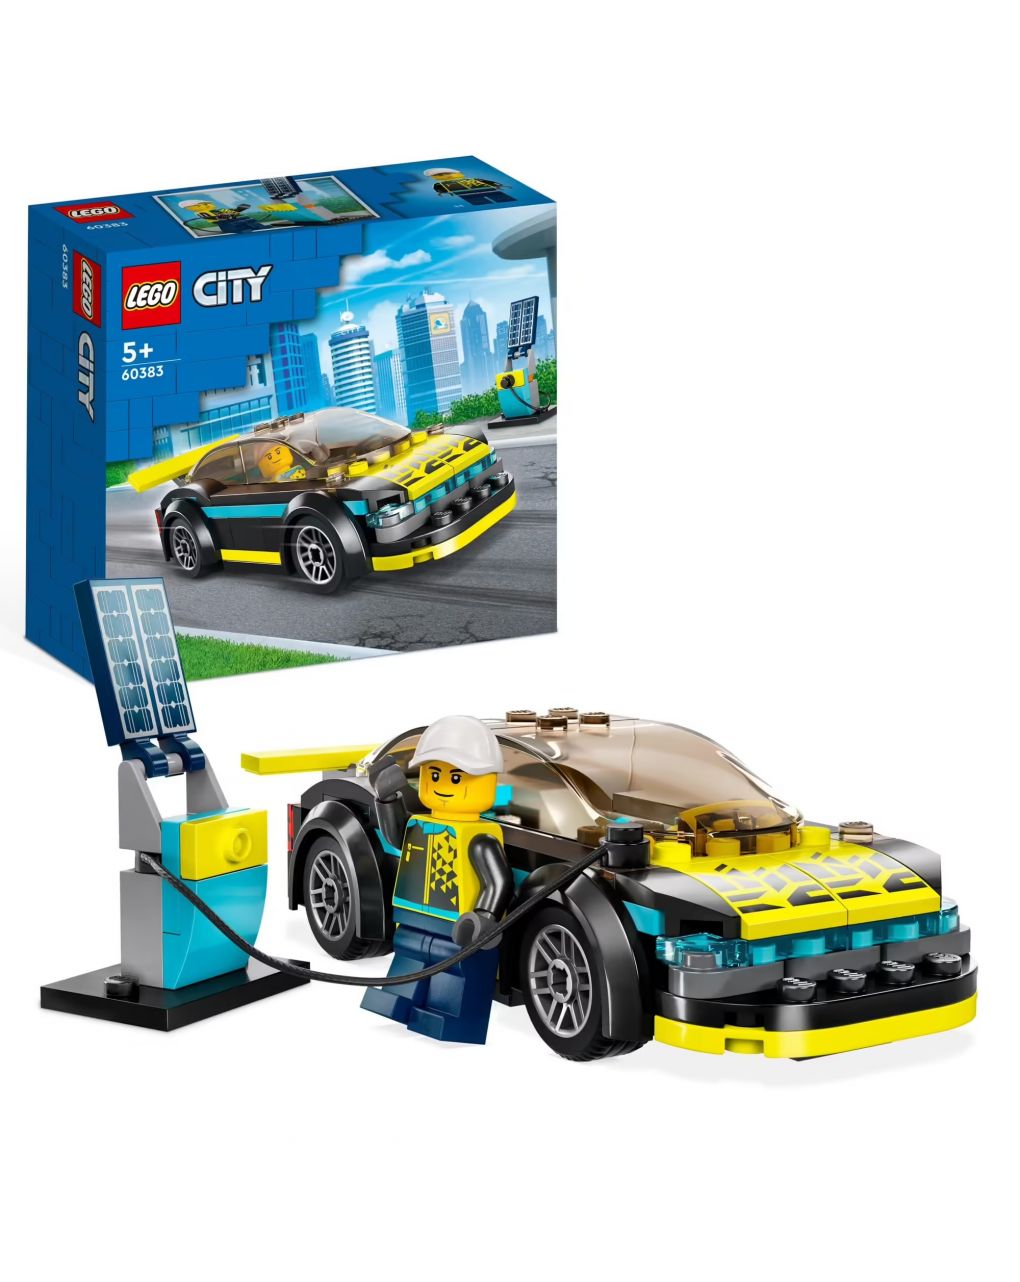 Lego city great vehicles electric sports car 60383